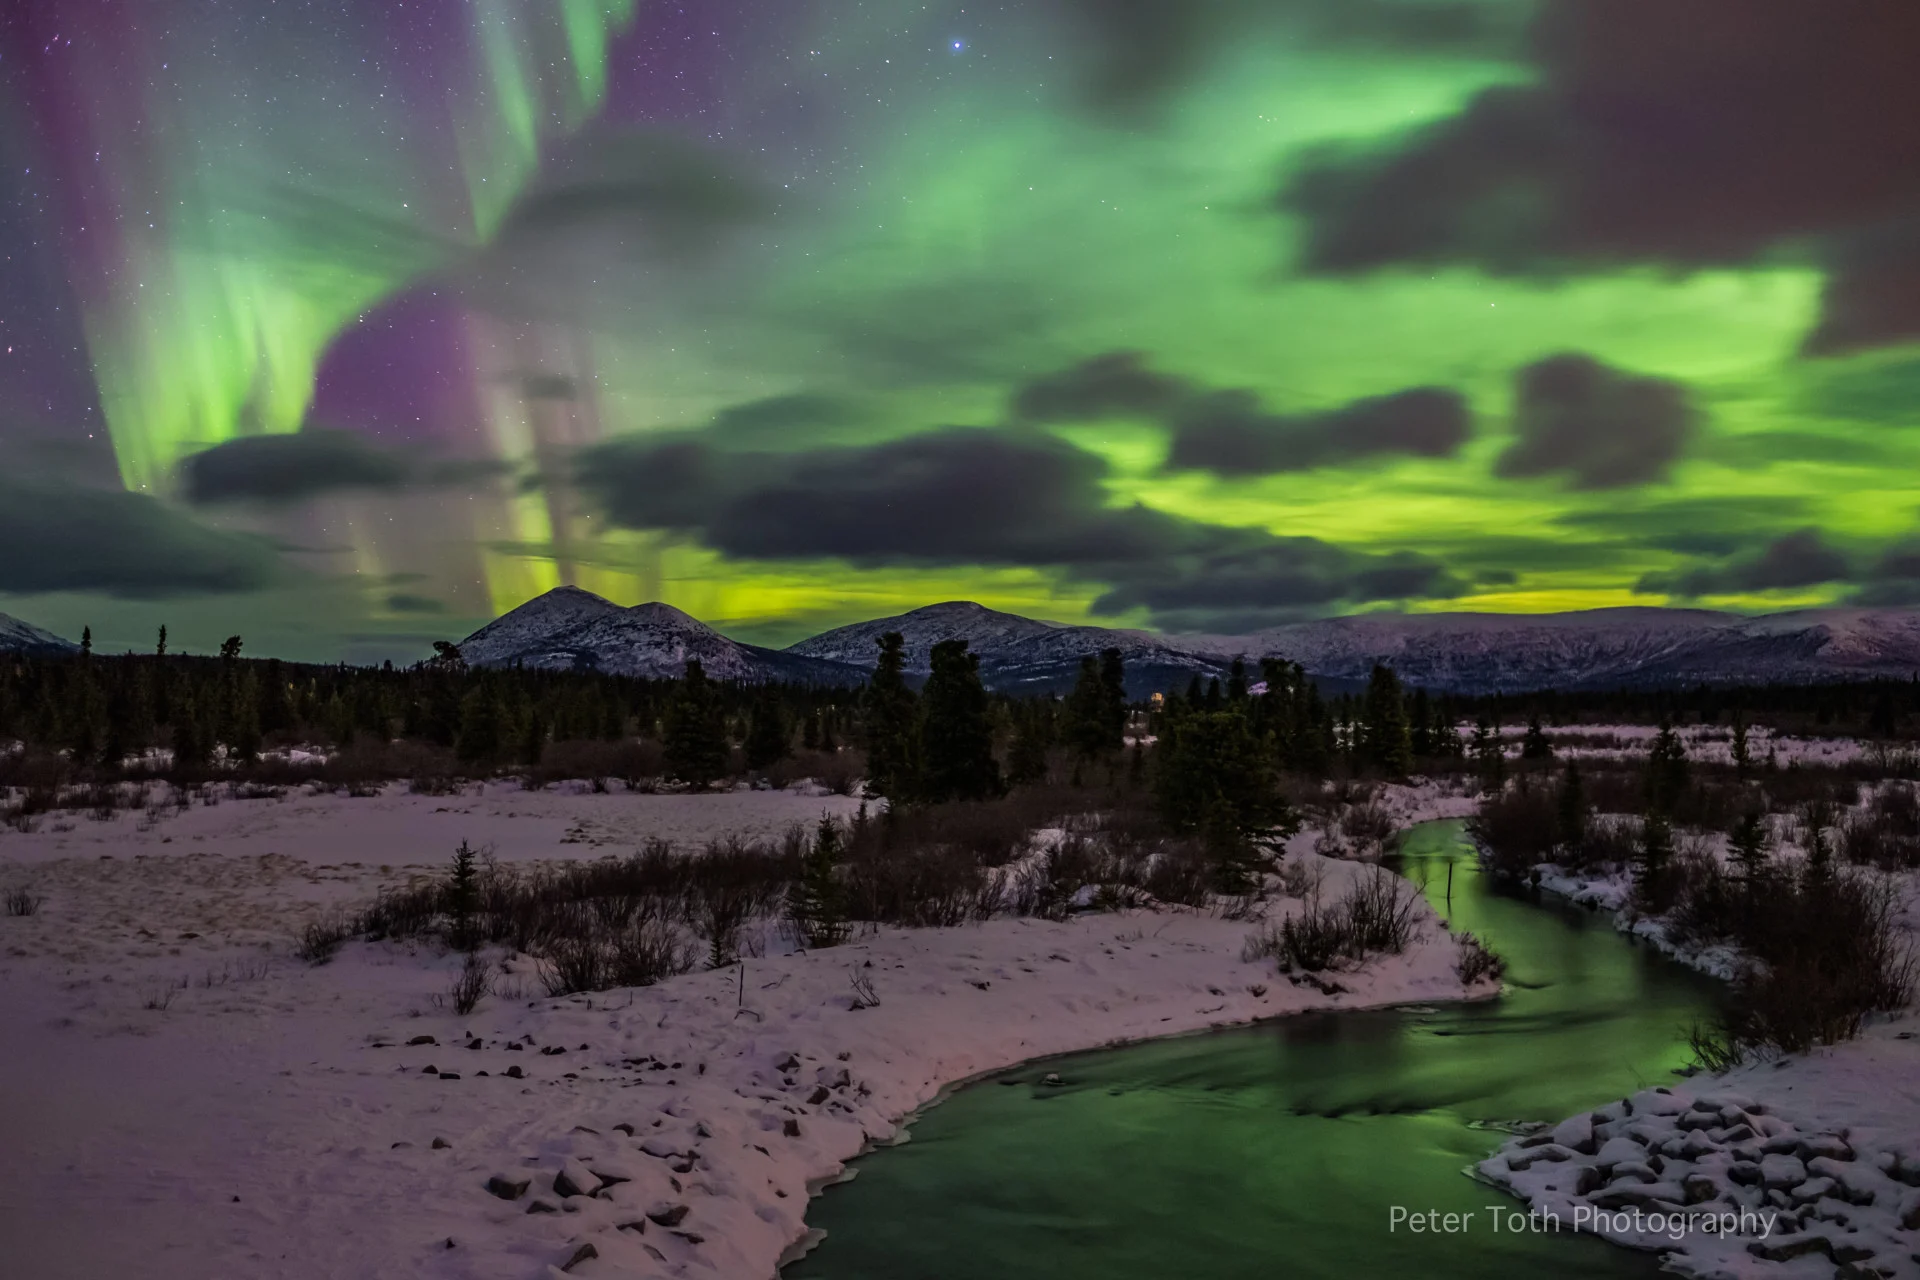 Ask a met: What causes the colours of the northern lights?